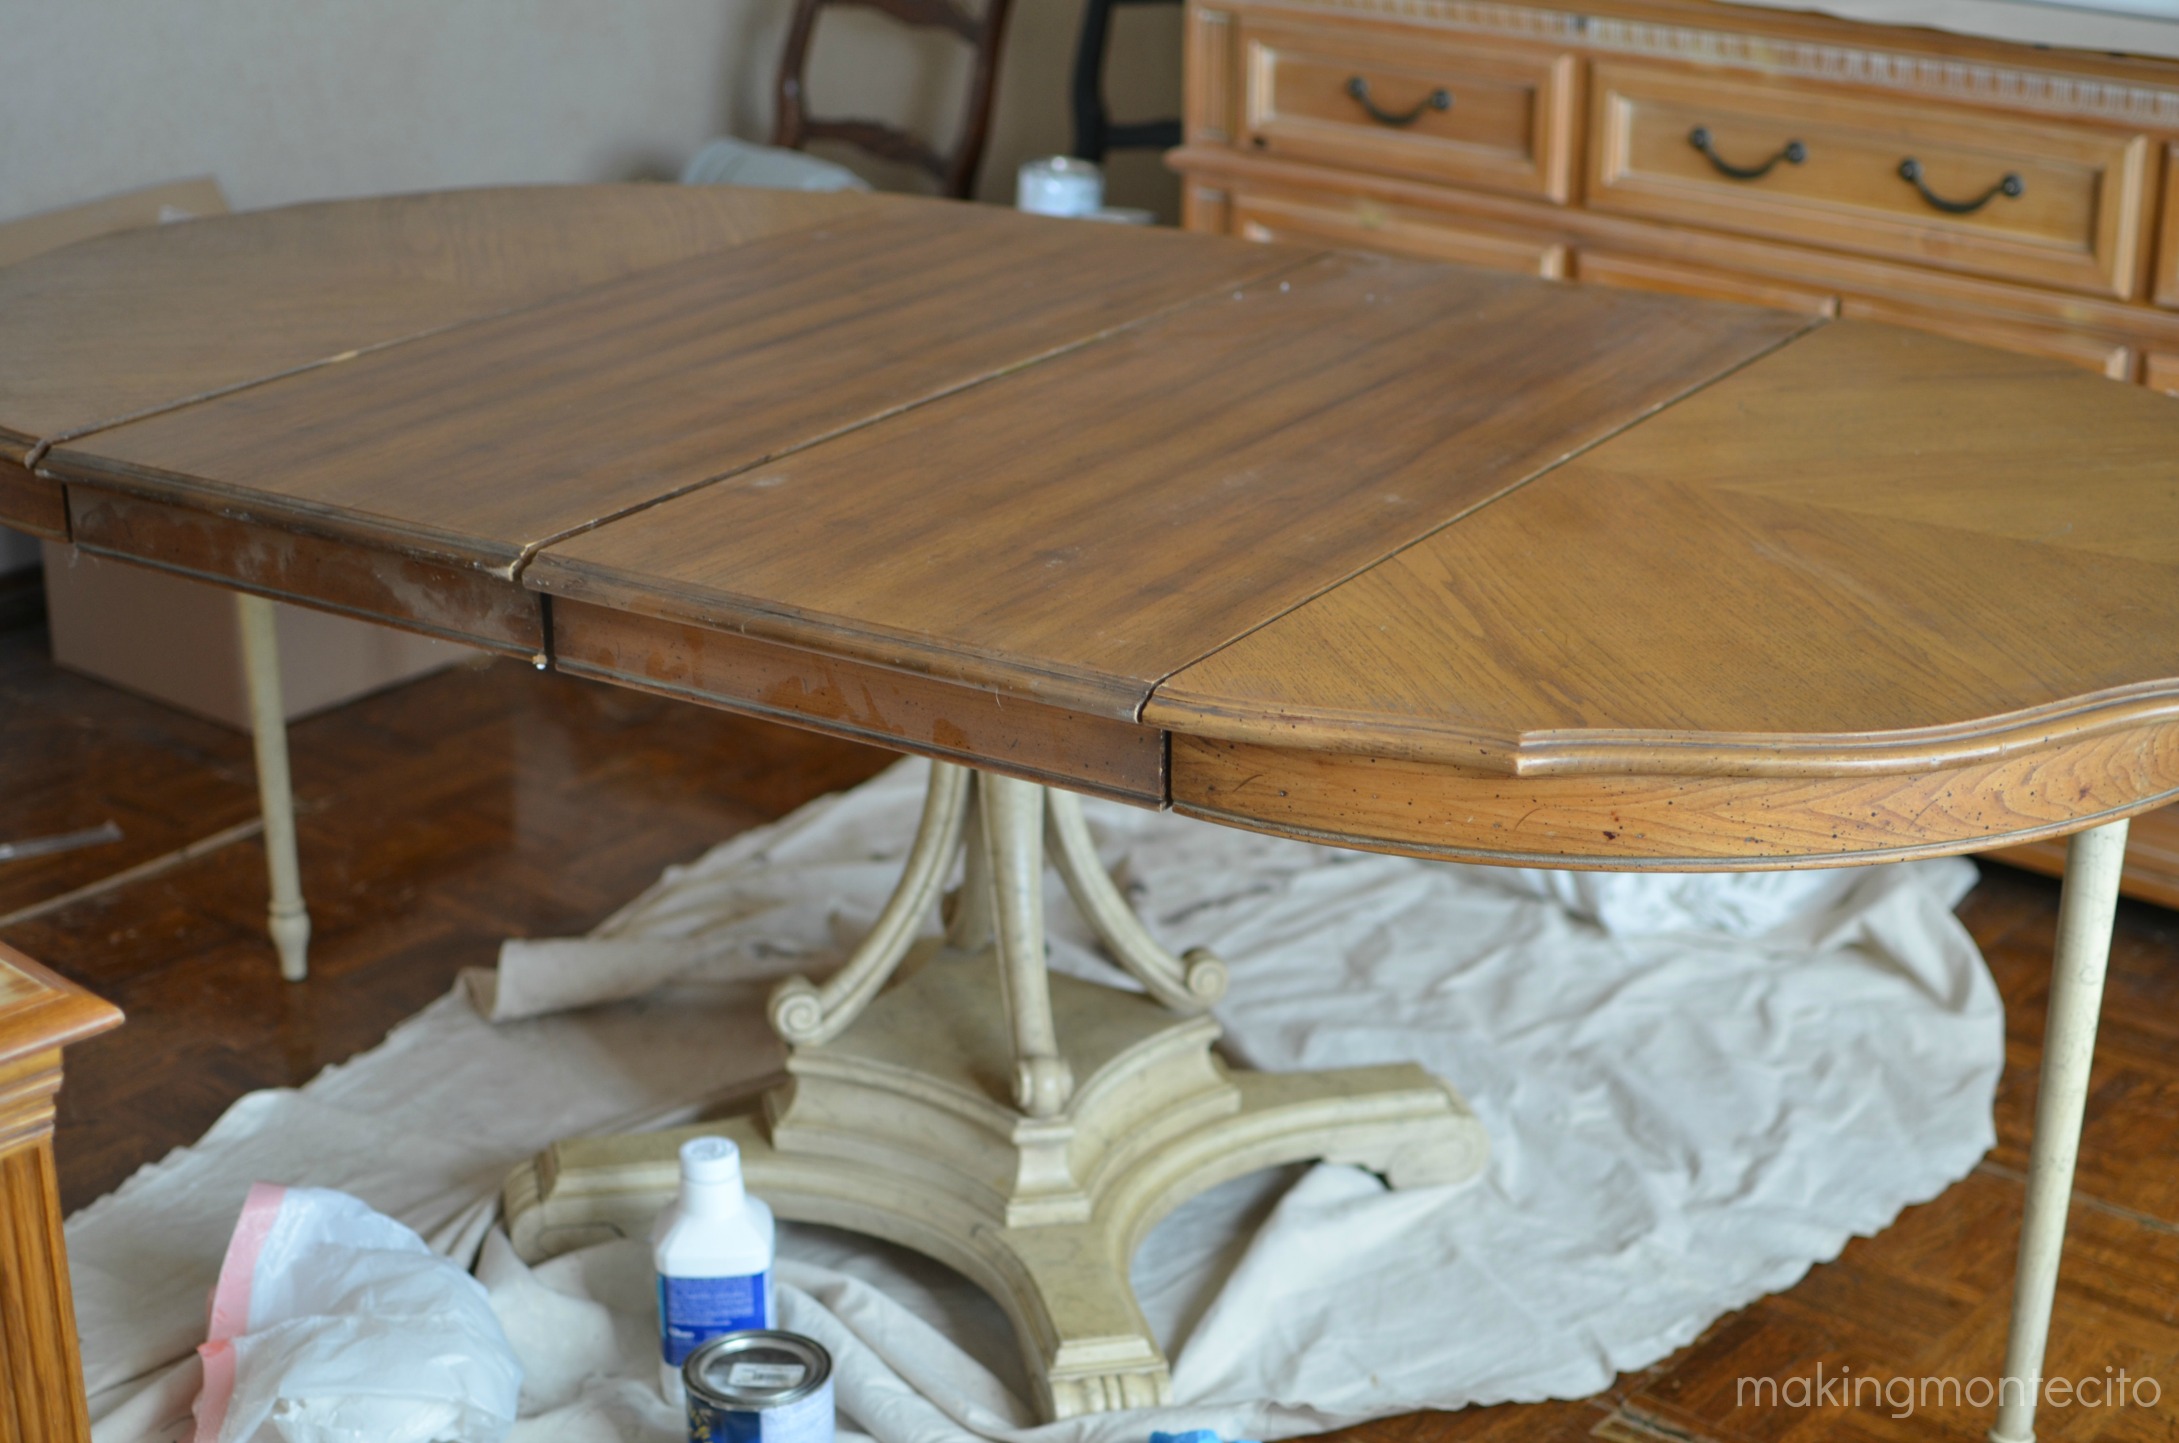 Vintage dining table updated - making montecito 2